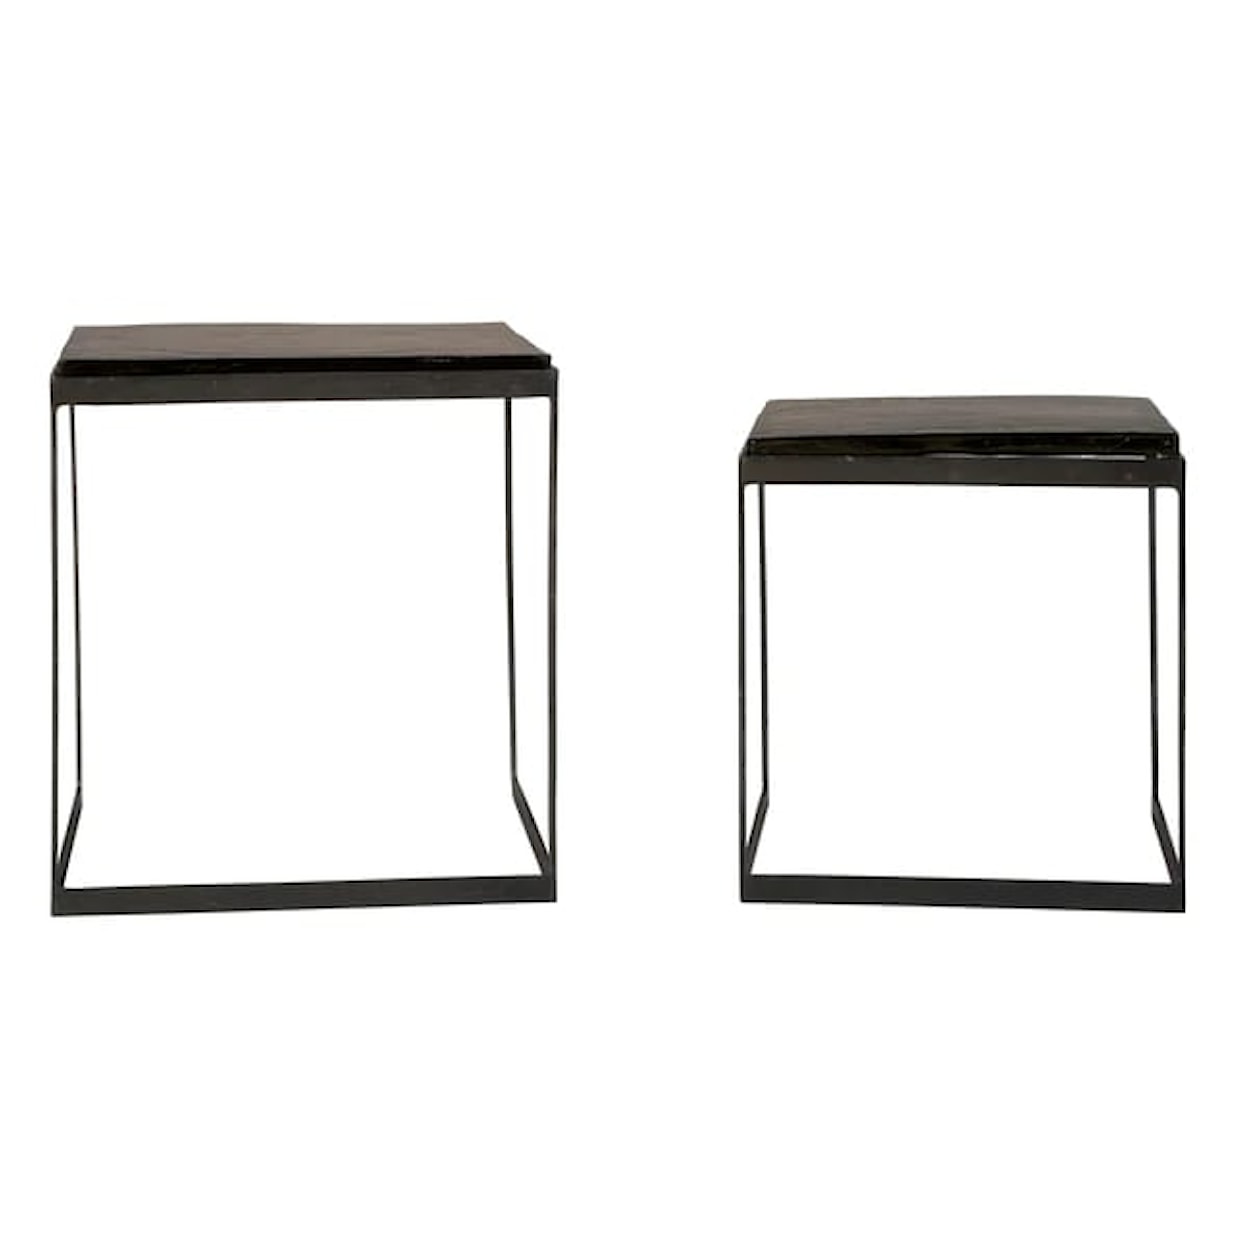 Hekman Accents Nesting Tables